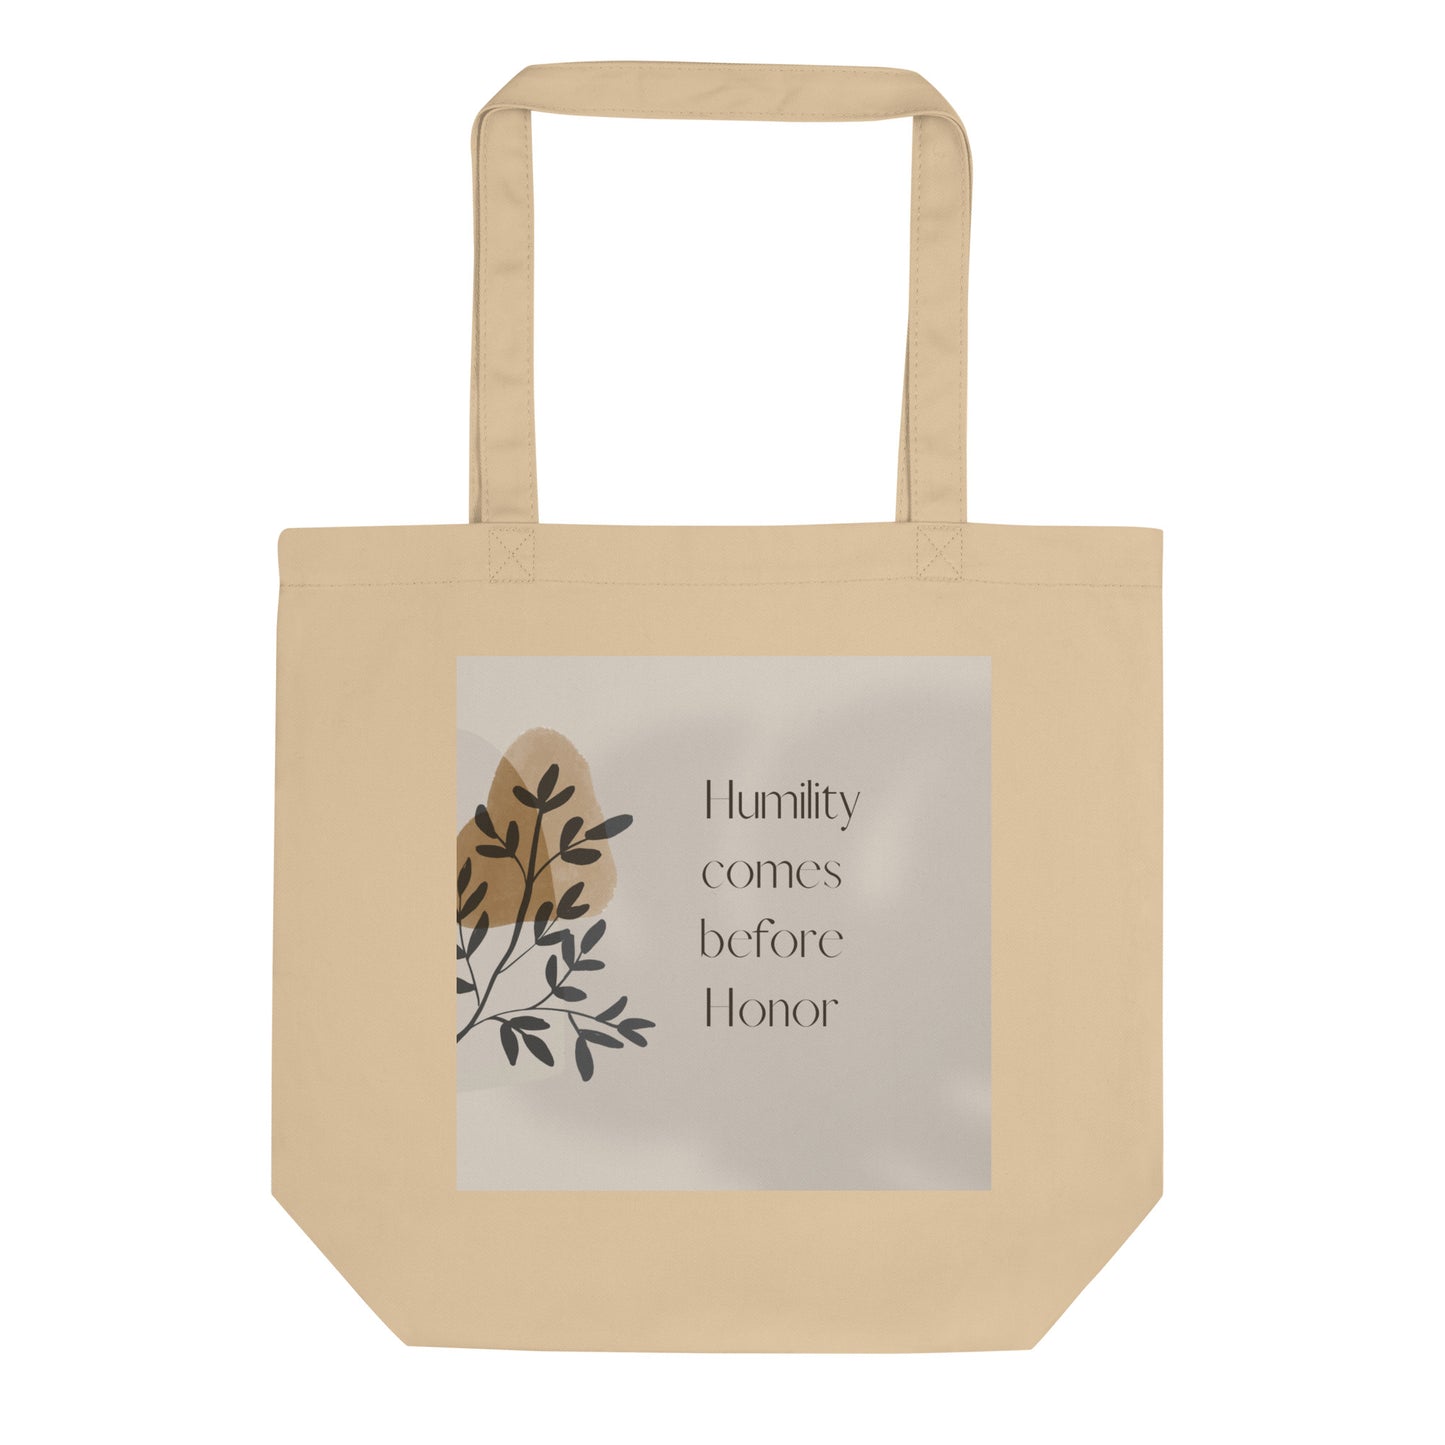 Humility comes before honor Eco Tote Bag